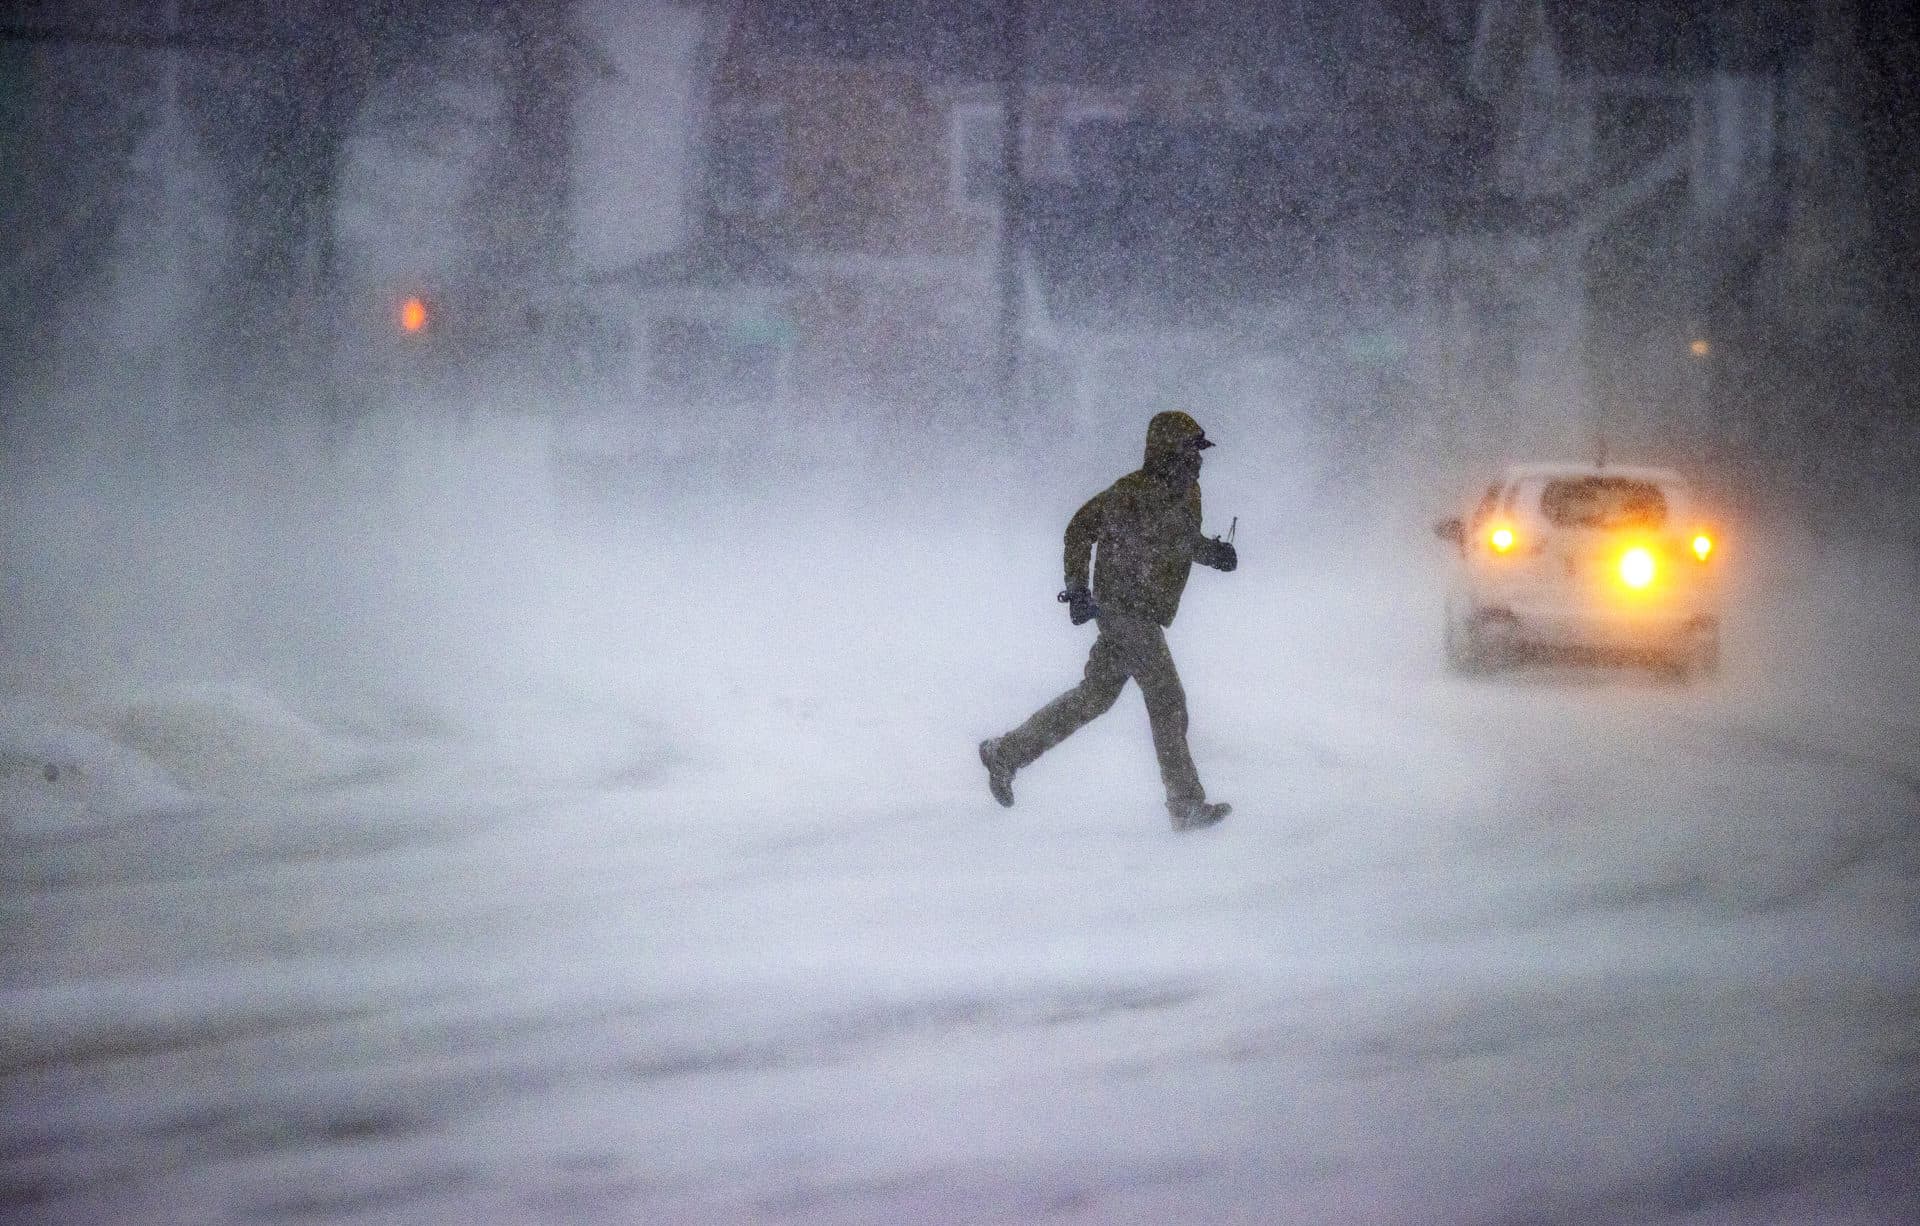 A man runs across Quincy Shore Drive as wind-blown snow creates visibility problems during the snowstorm in Quincy Saturday. (Stan Grossfeld/The Boston Globe via Getty Images)